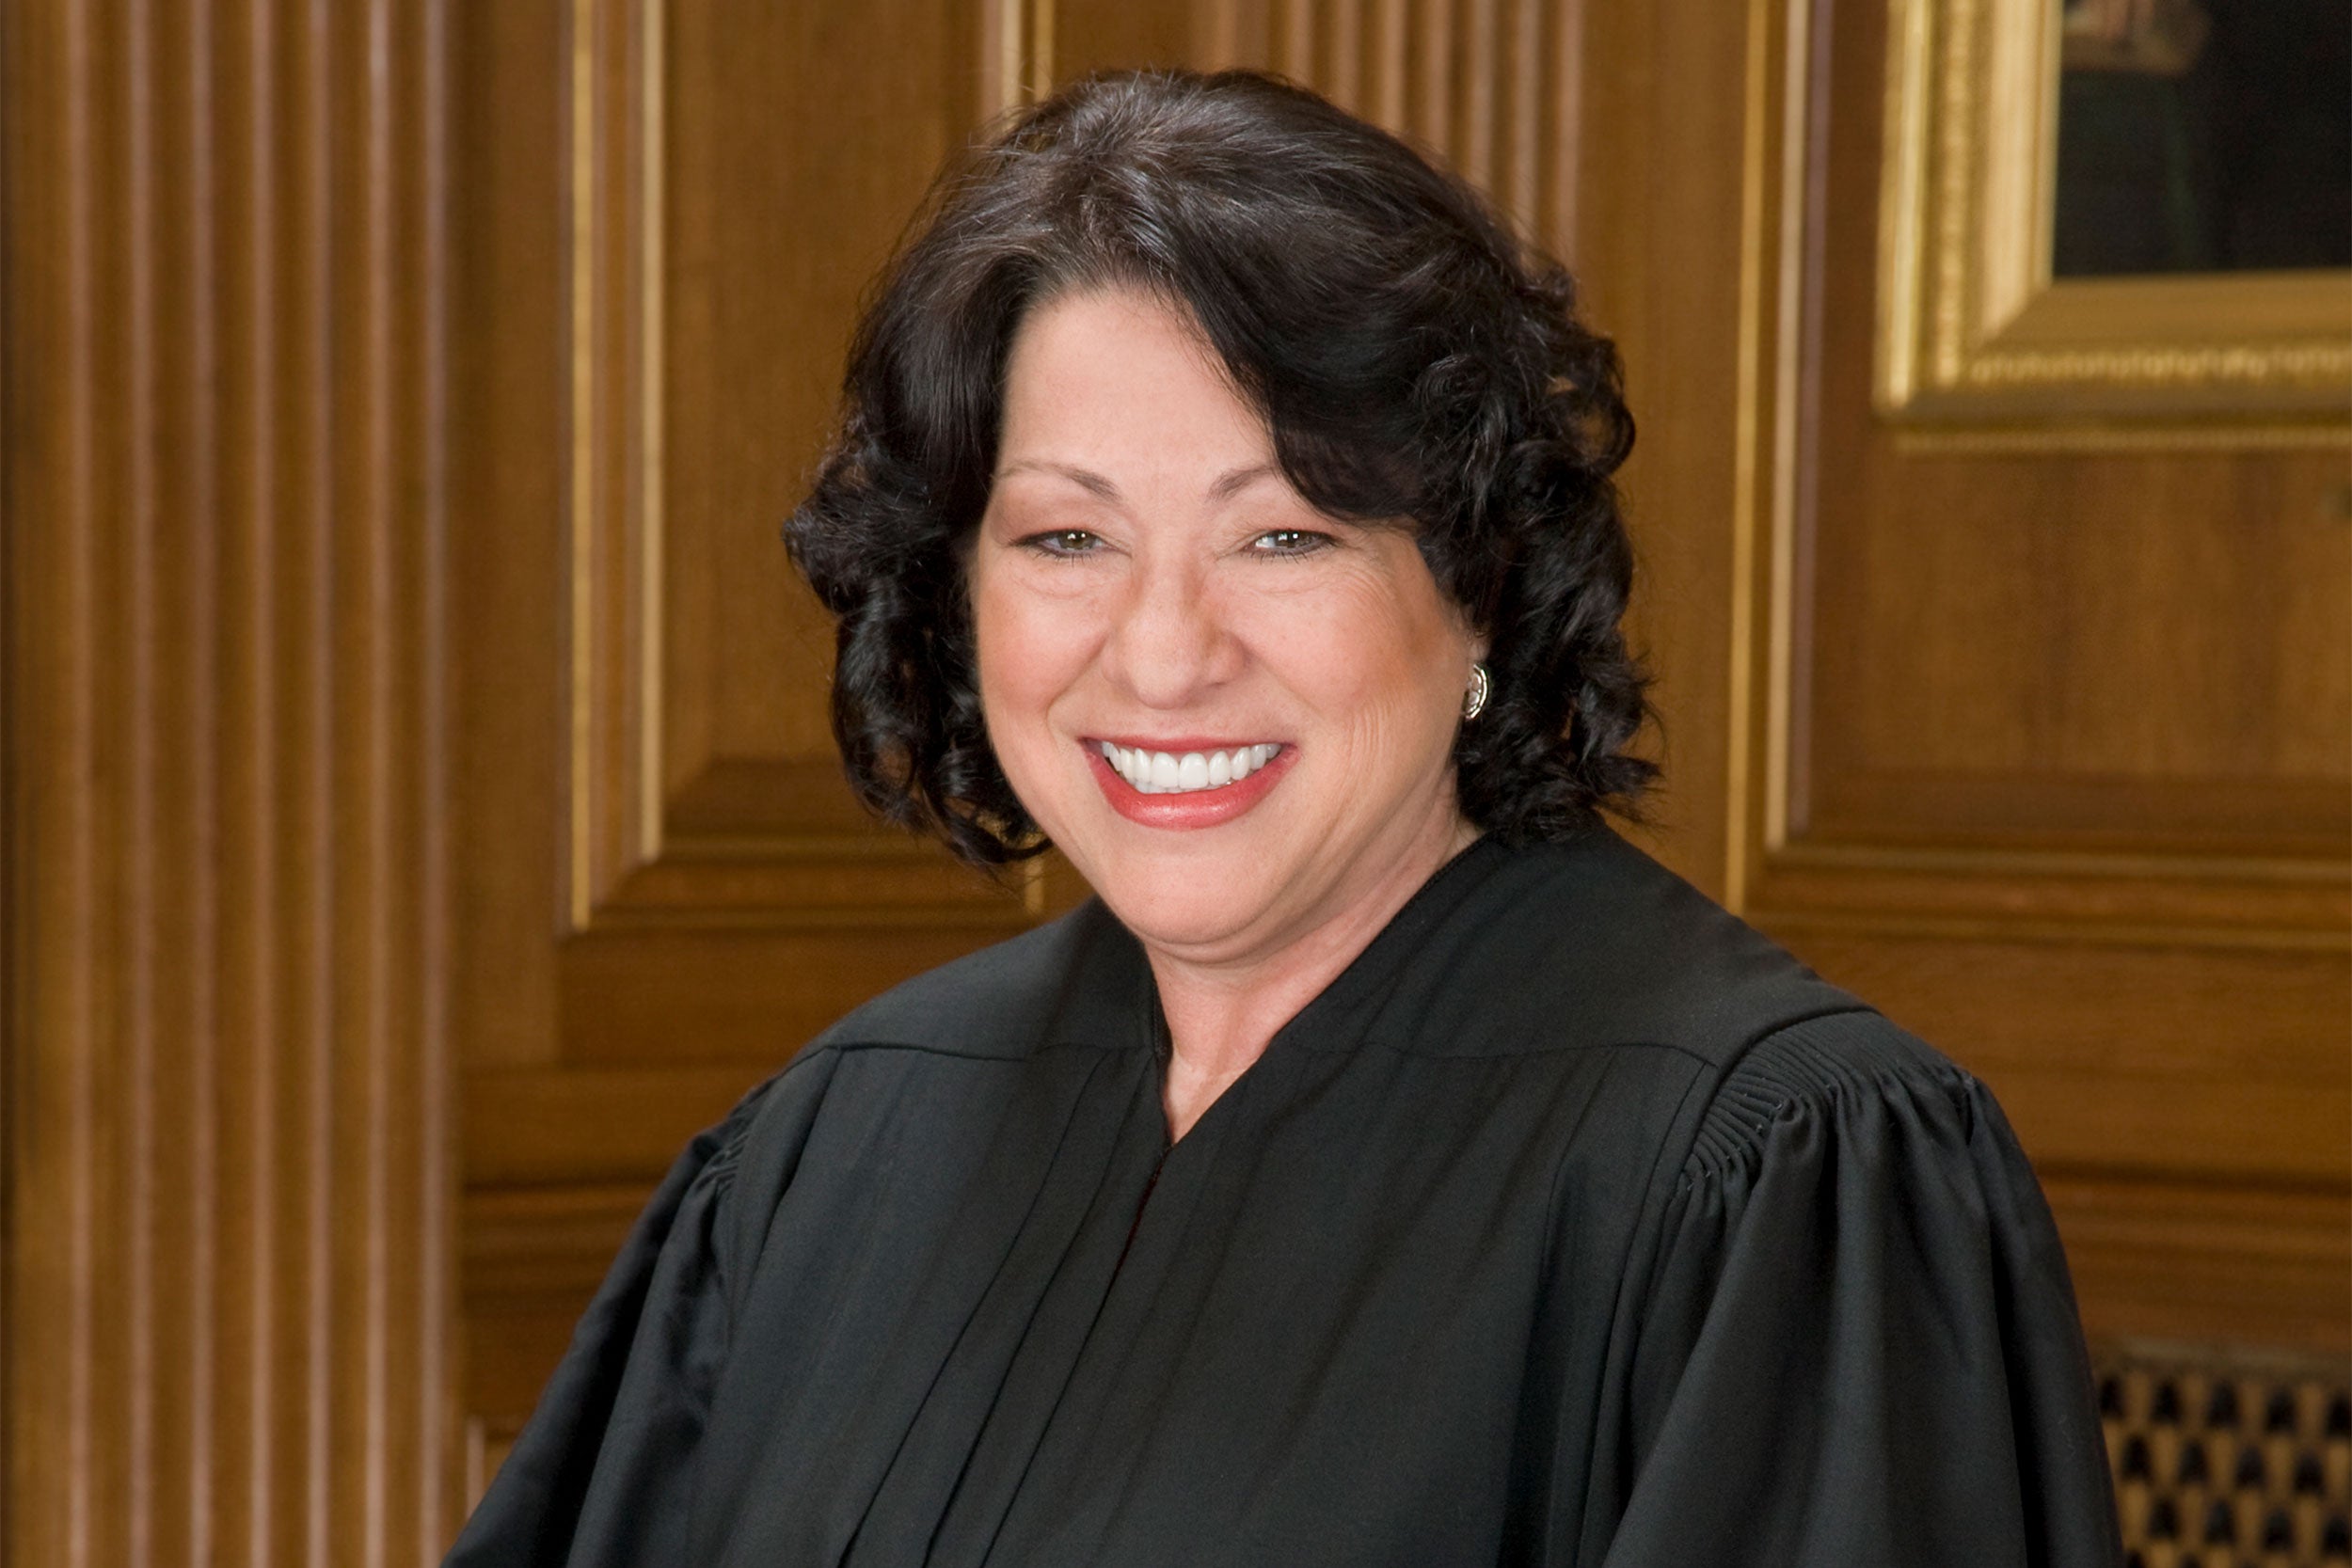 Associate Justice of the U.S. Supreme Court Sonia Sotomayor.